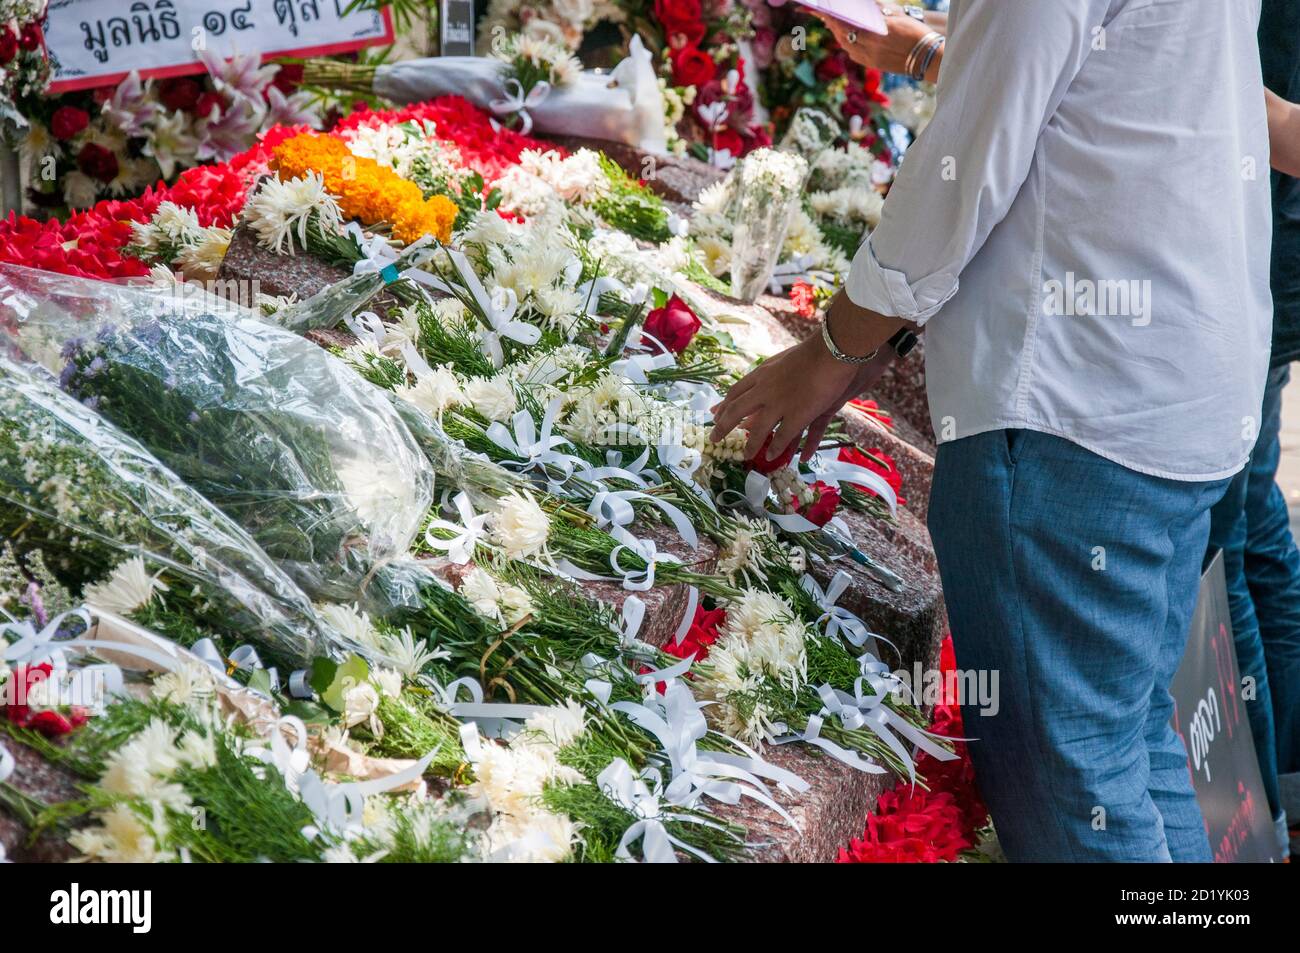 A person lays flowers in the memorial for the victims of the Thammasat University Massacre.The 6 October 1976 Thammasat University massacre was a violent crackdown by Thai police joined with right-wing paramilitaries against leftist protesters and students who had occupied Bangkok's Thammasat University. Stock Photo